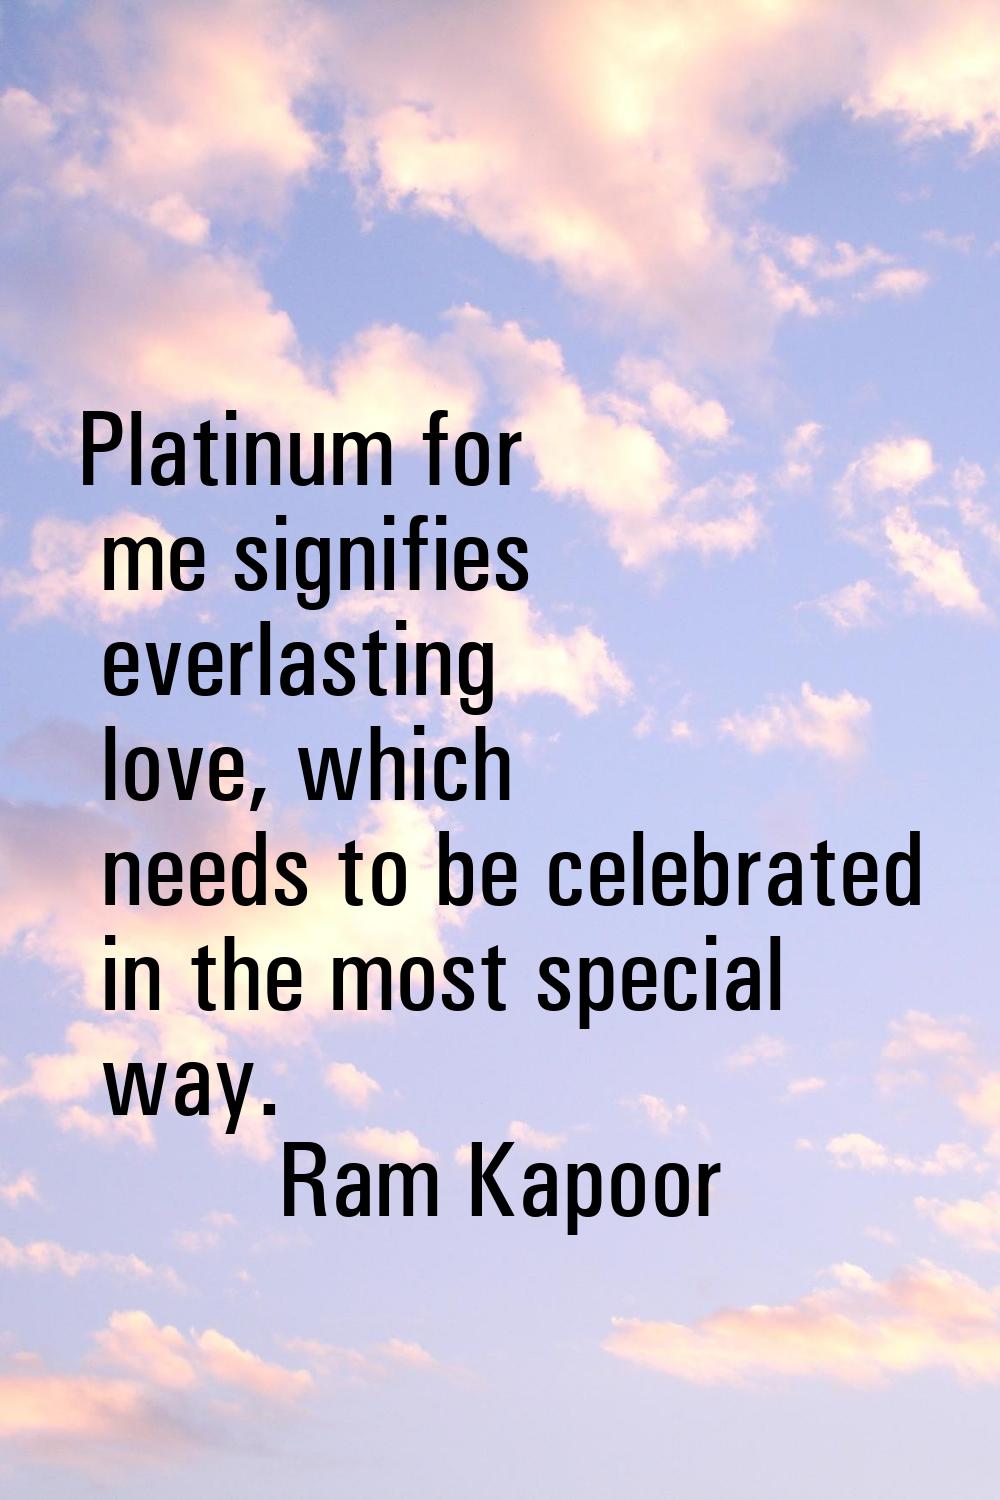 Platinum for me signifies everlasting love, which needs to be celebrated in the most special way.